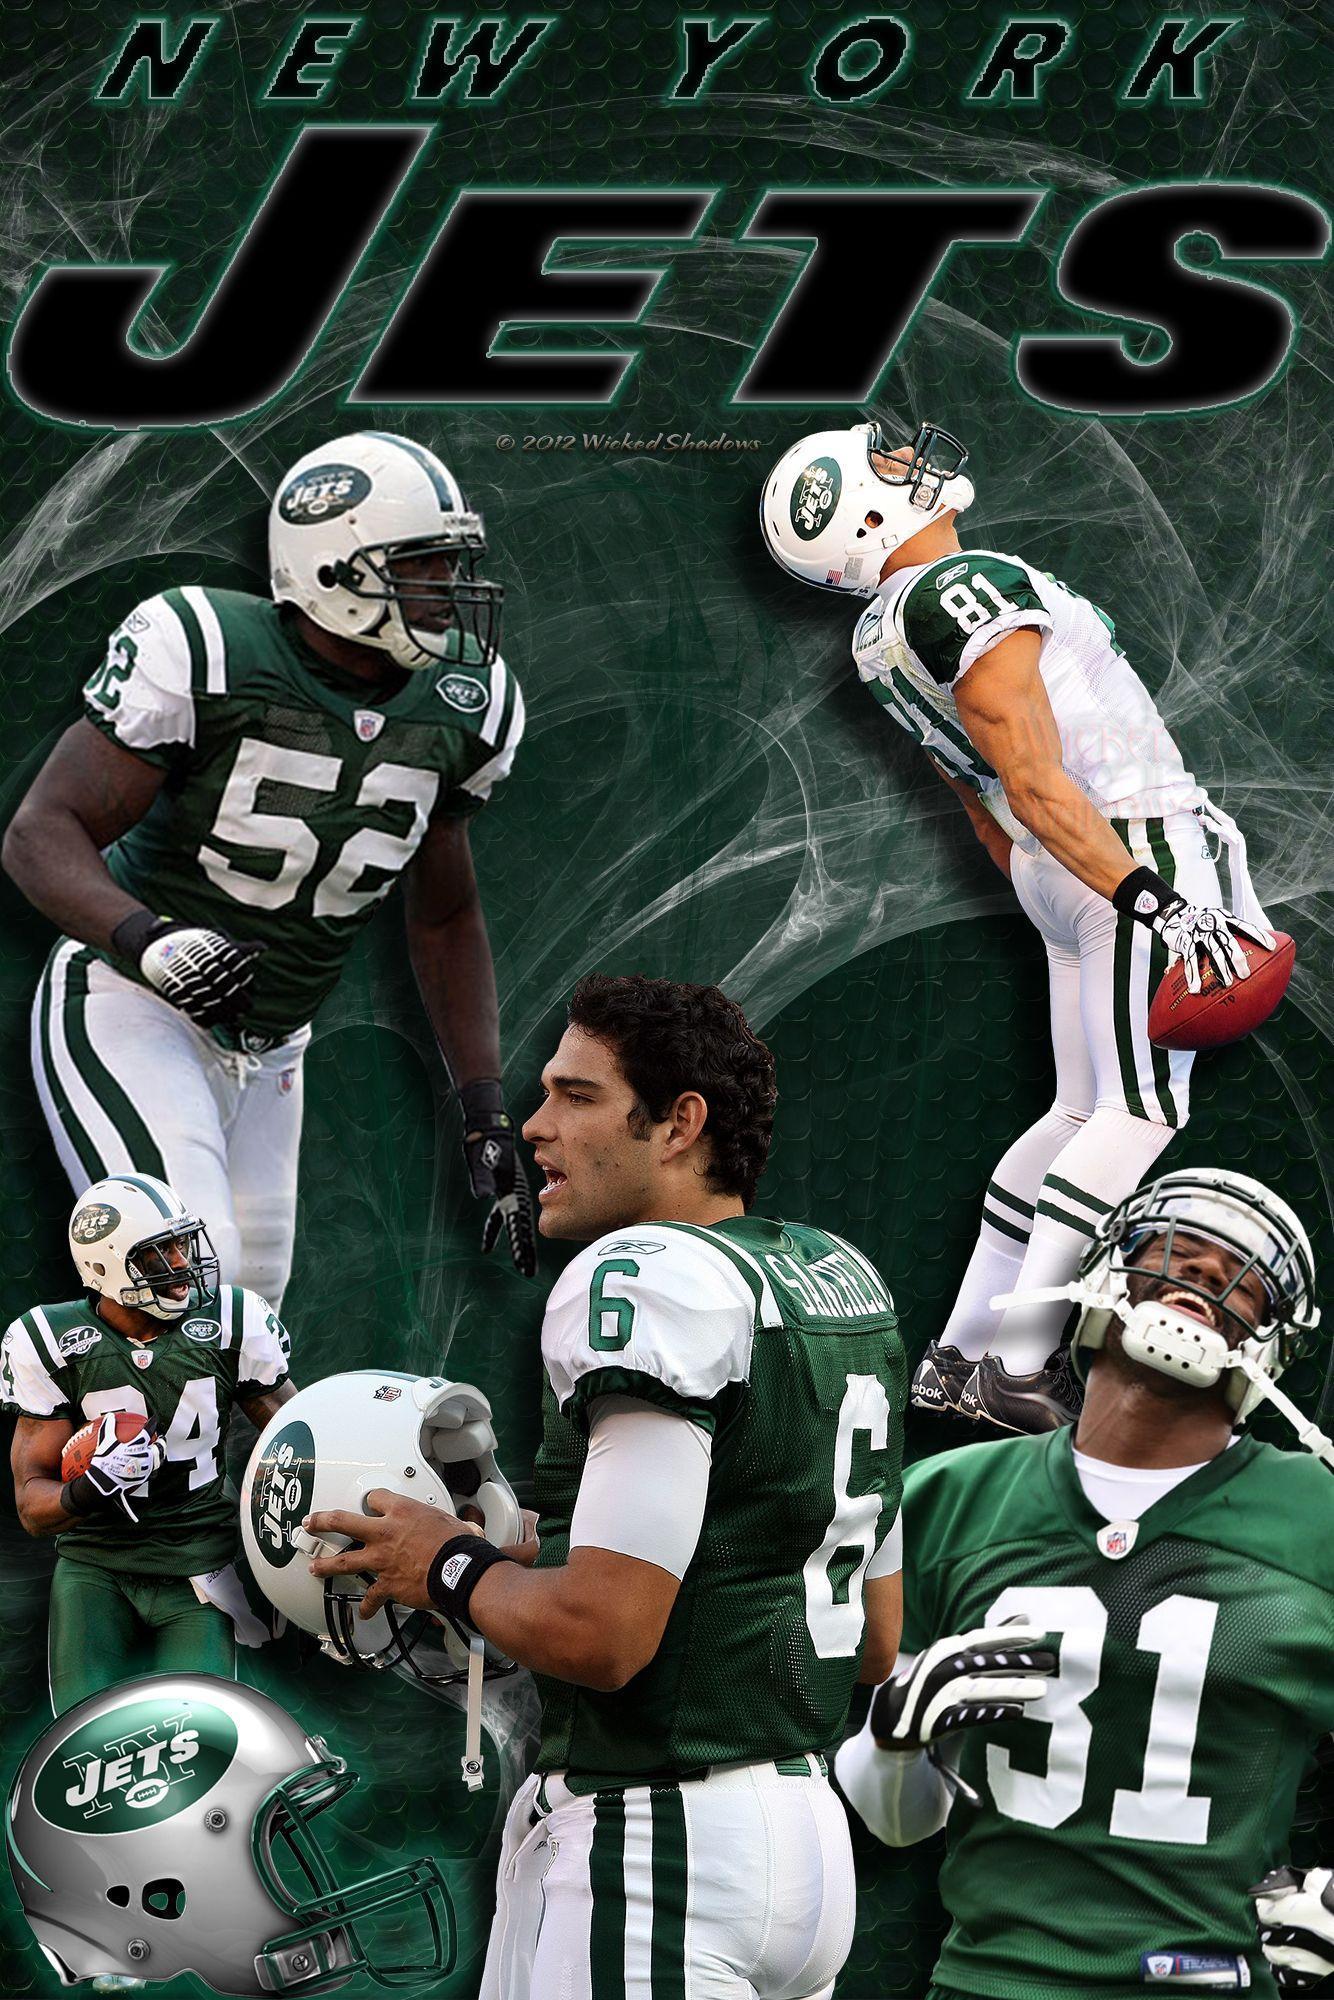 Wallpaper By Wicked Shadows: New York Jets Team Wallpaper